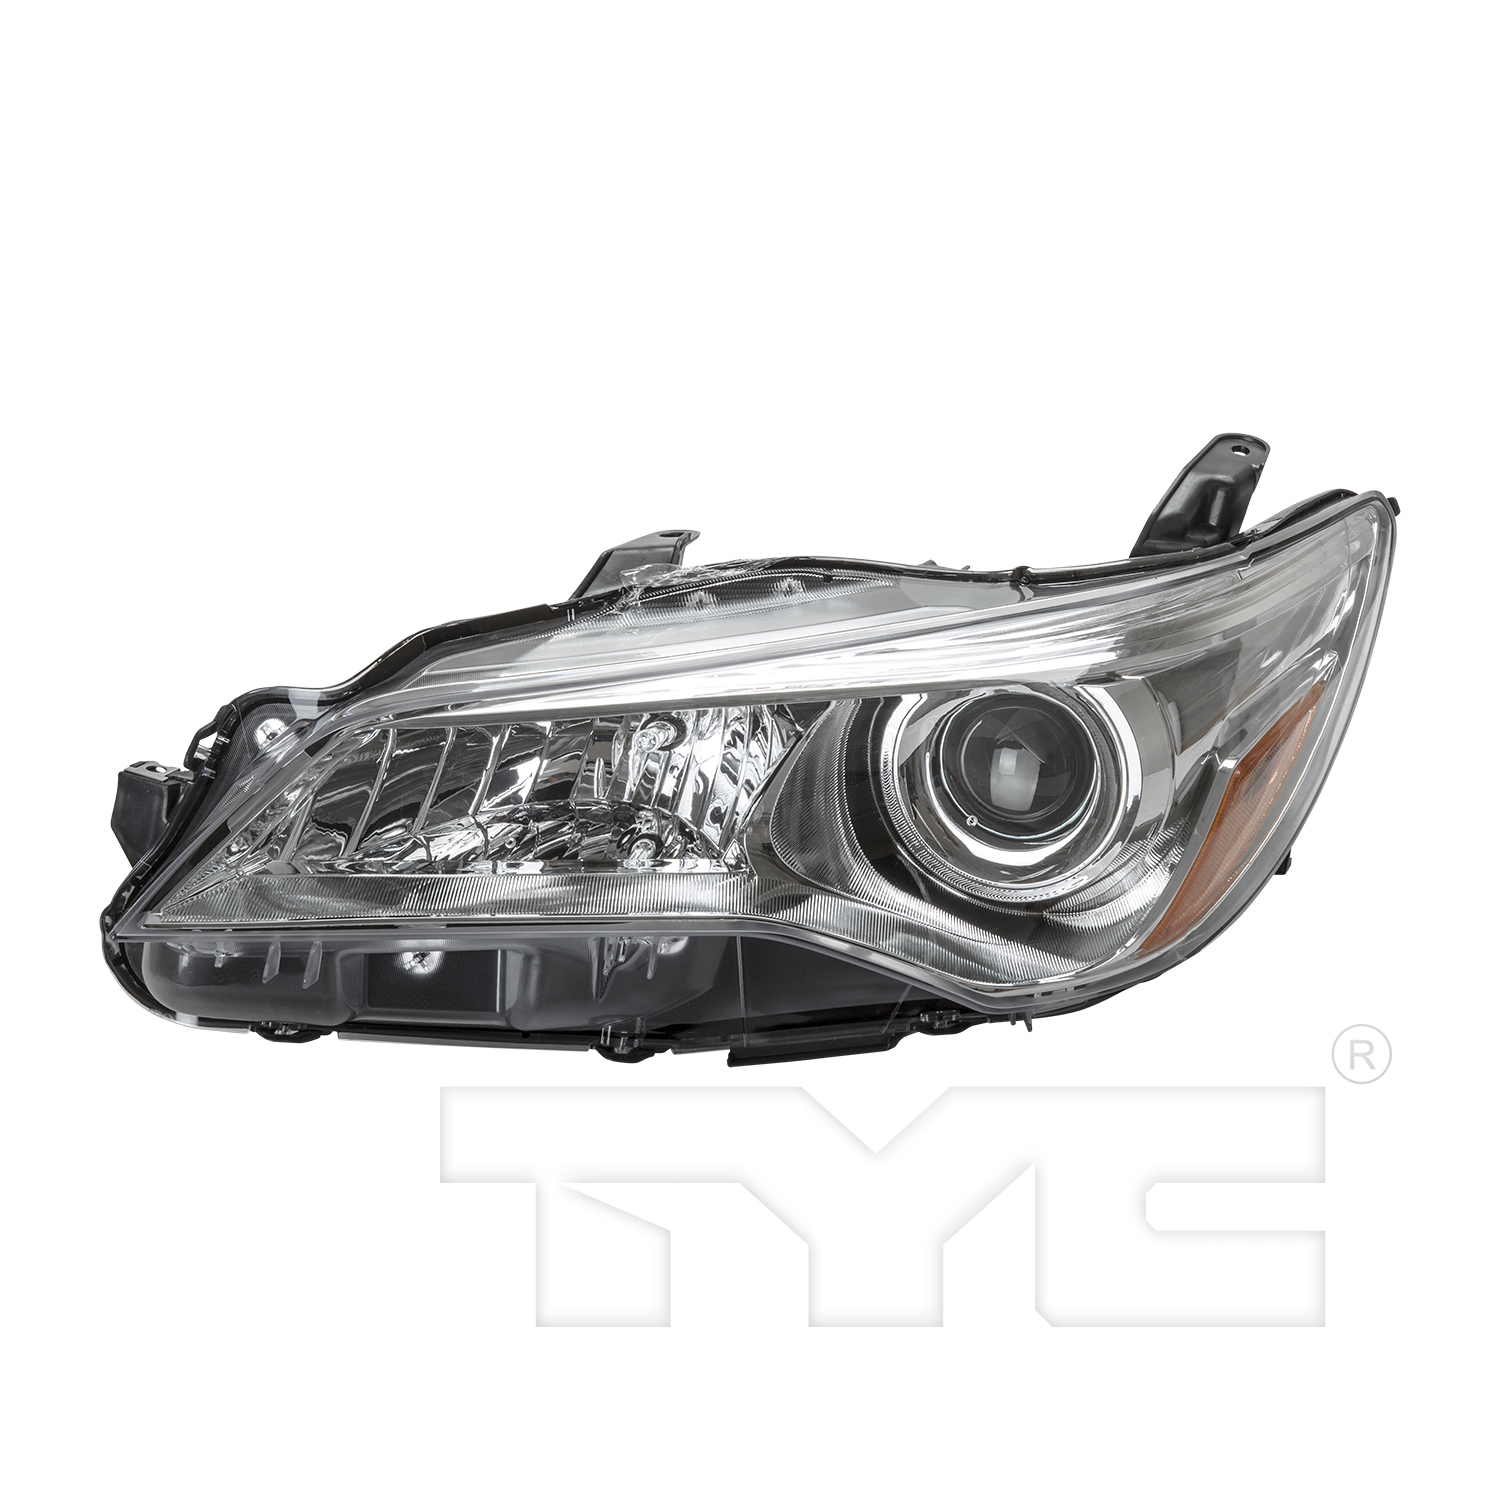 Aftermarket HEADLIGHTS for TOYOTA - CAMRY, CAMRY,15-17,LT Headlamp assy composite